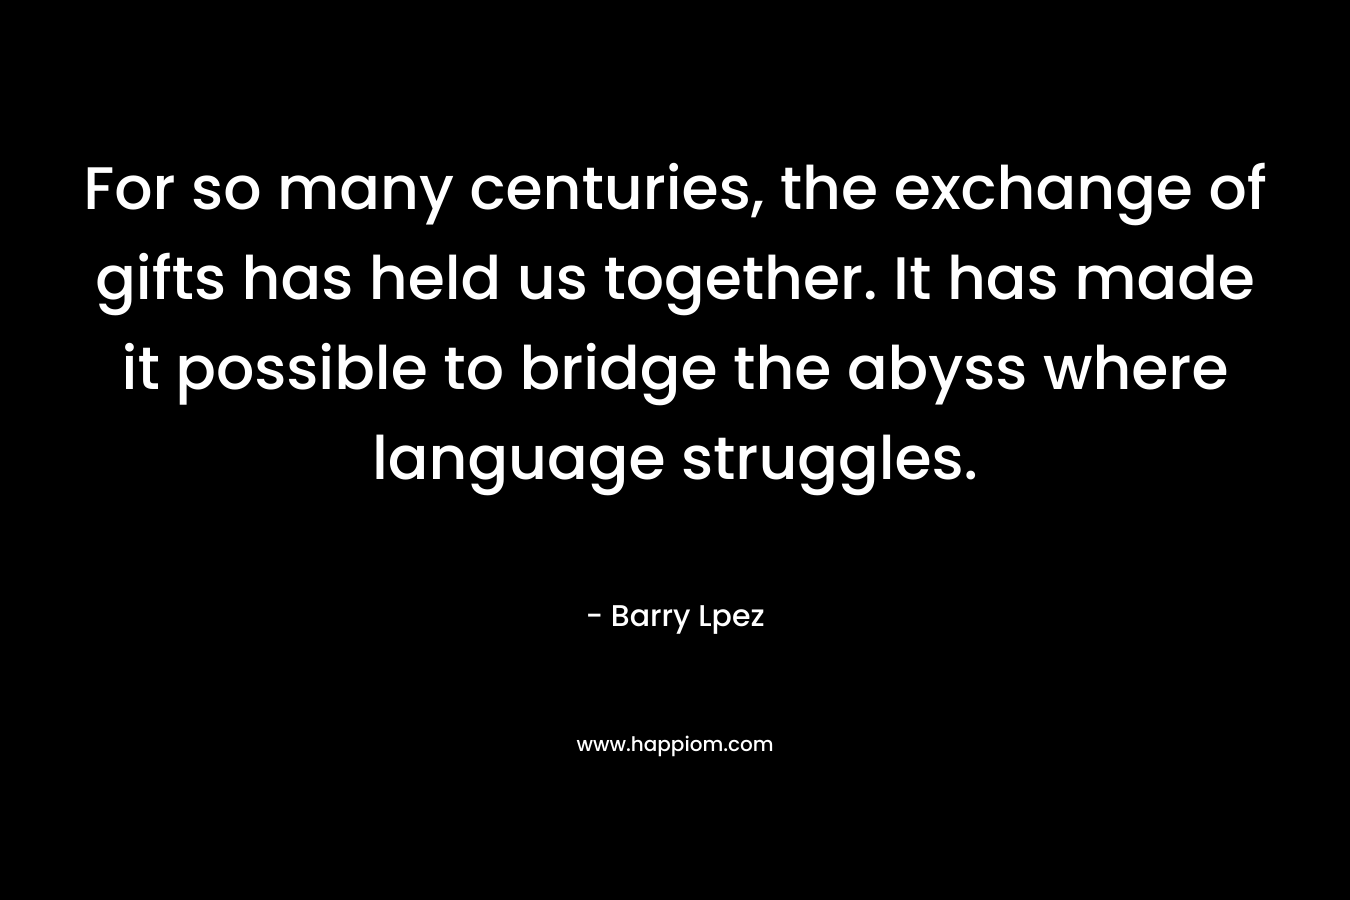 For so many centuries, the exchange of gifts has held us together. It has made it possible to bridge the abyss where language struggles. – Barry Lpez